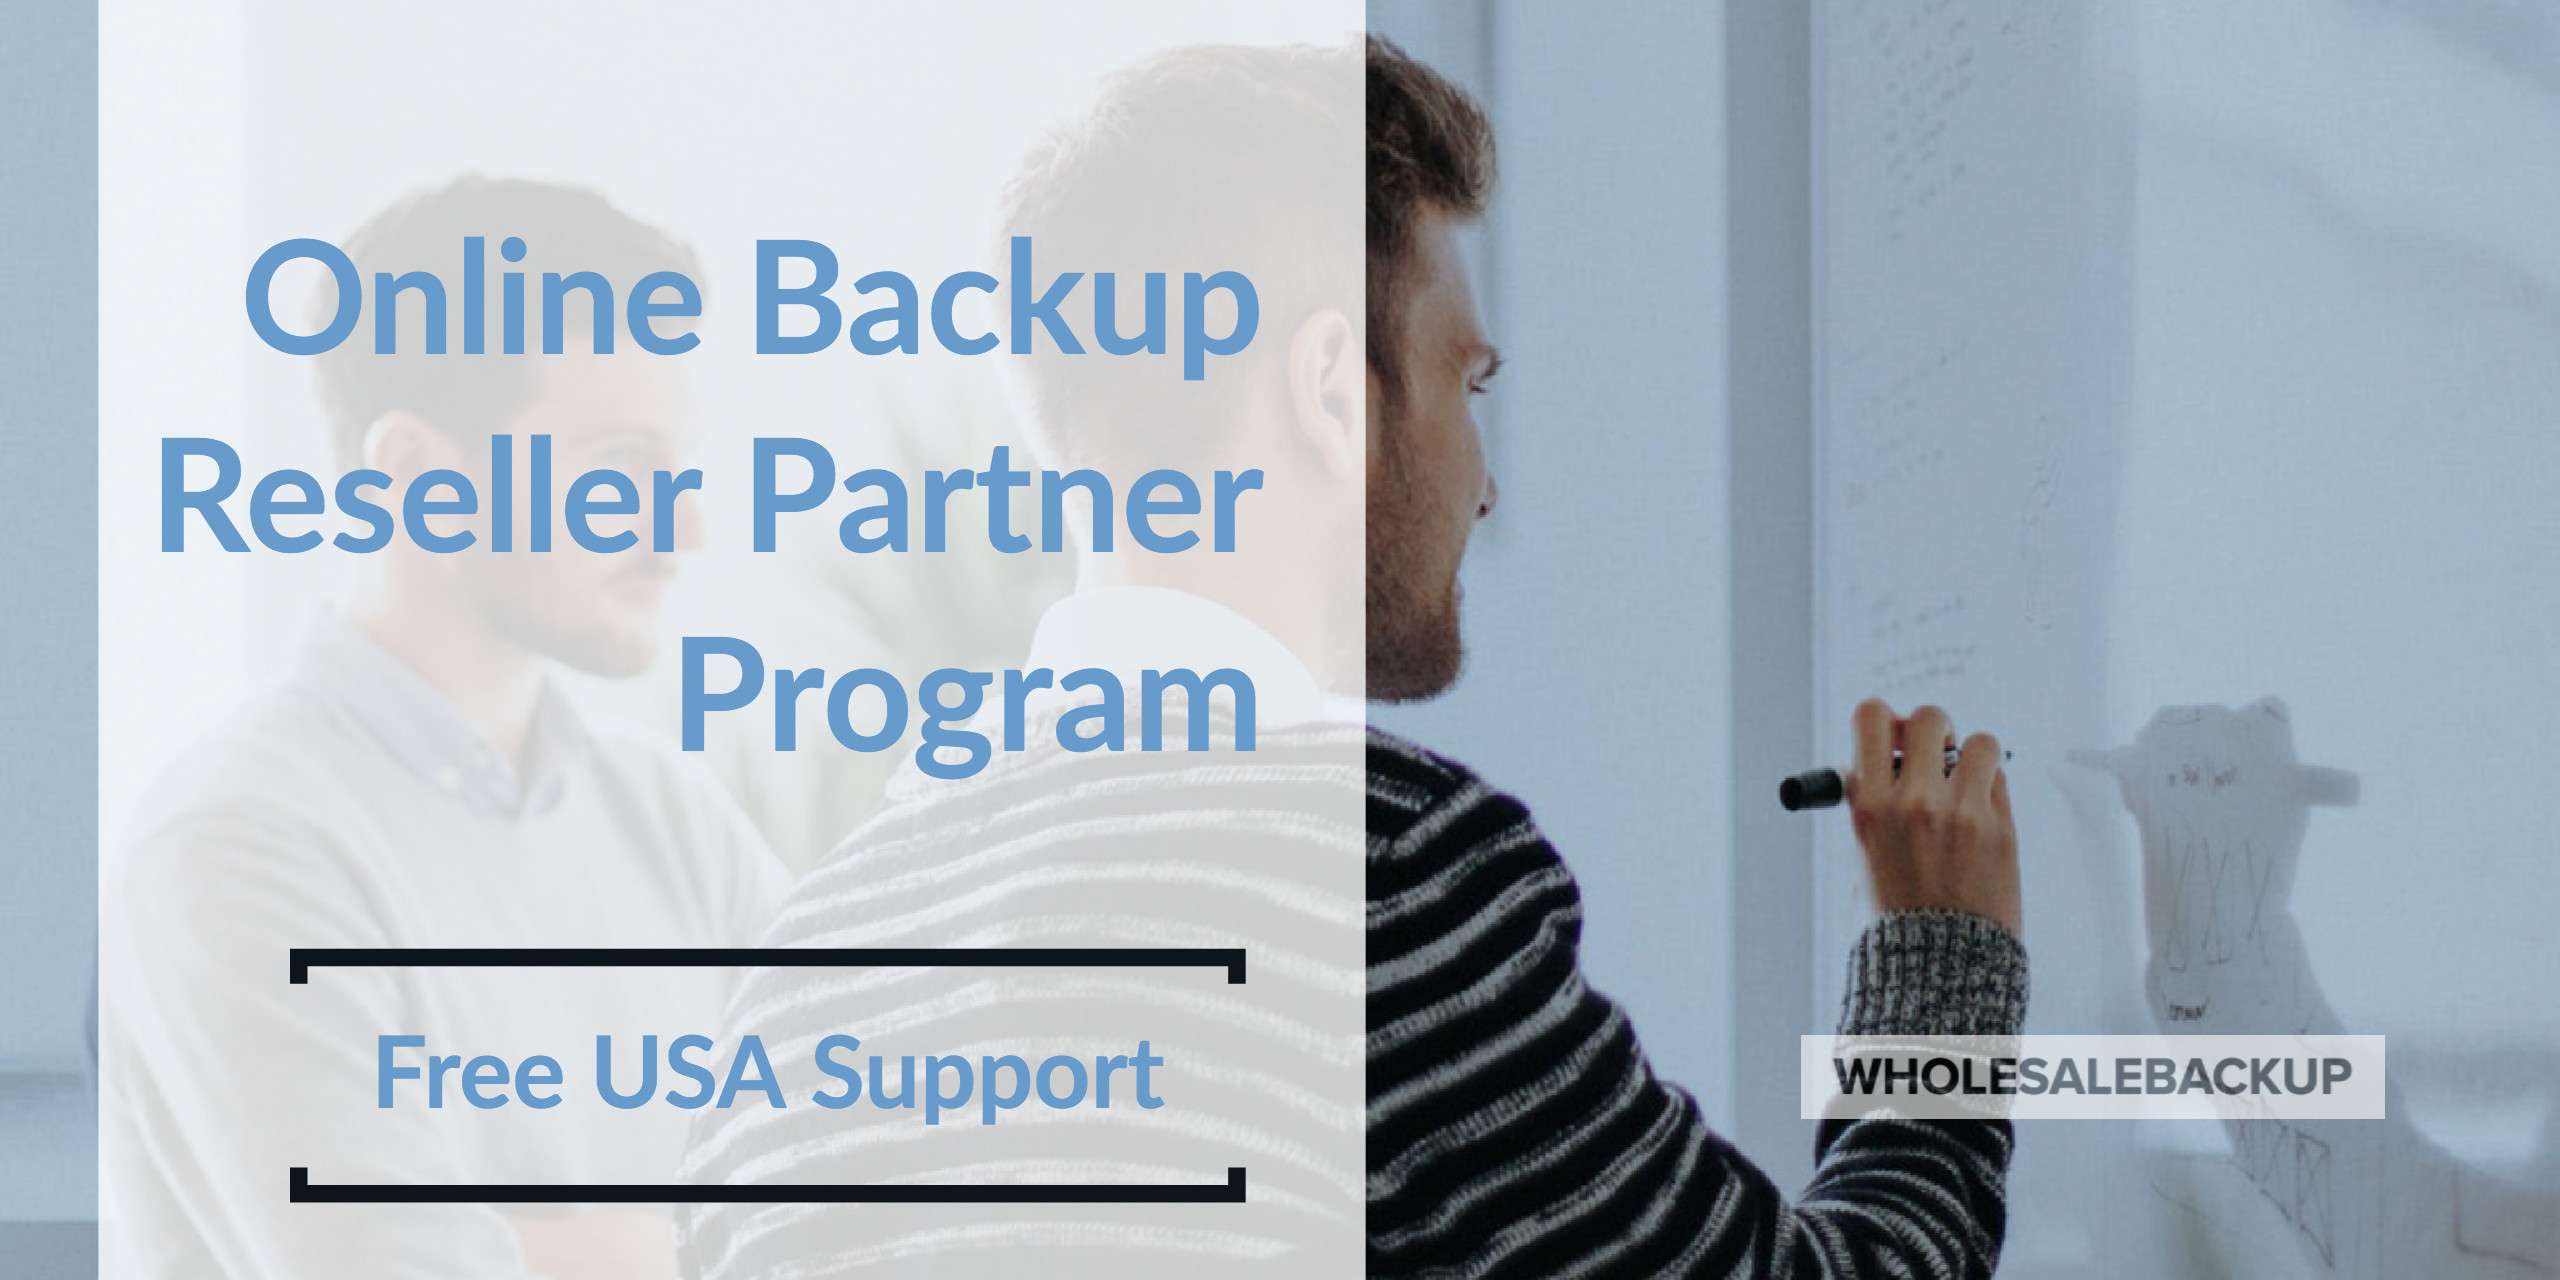 online backup reseller partnership program features and benefits